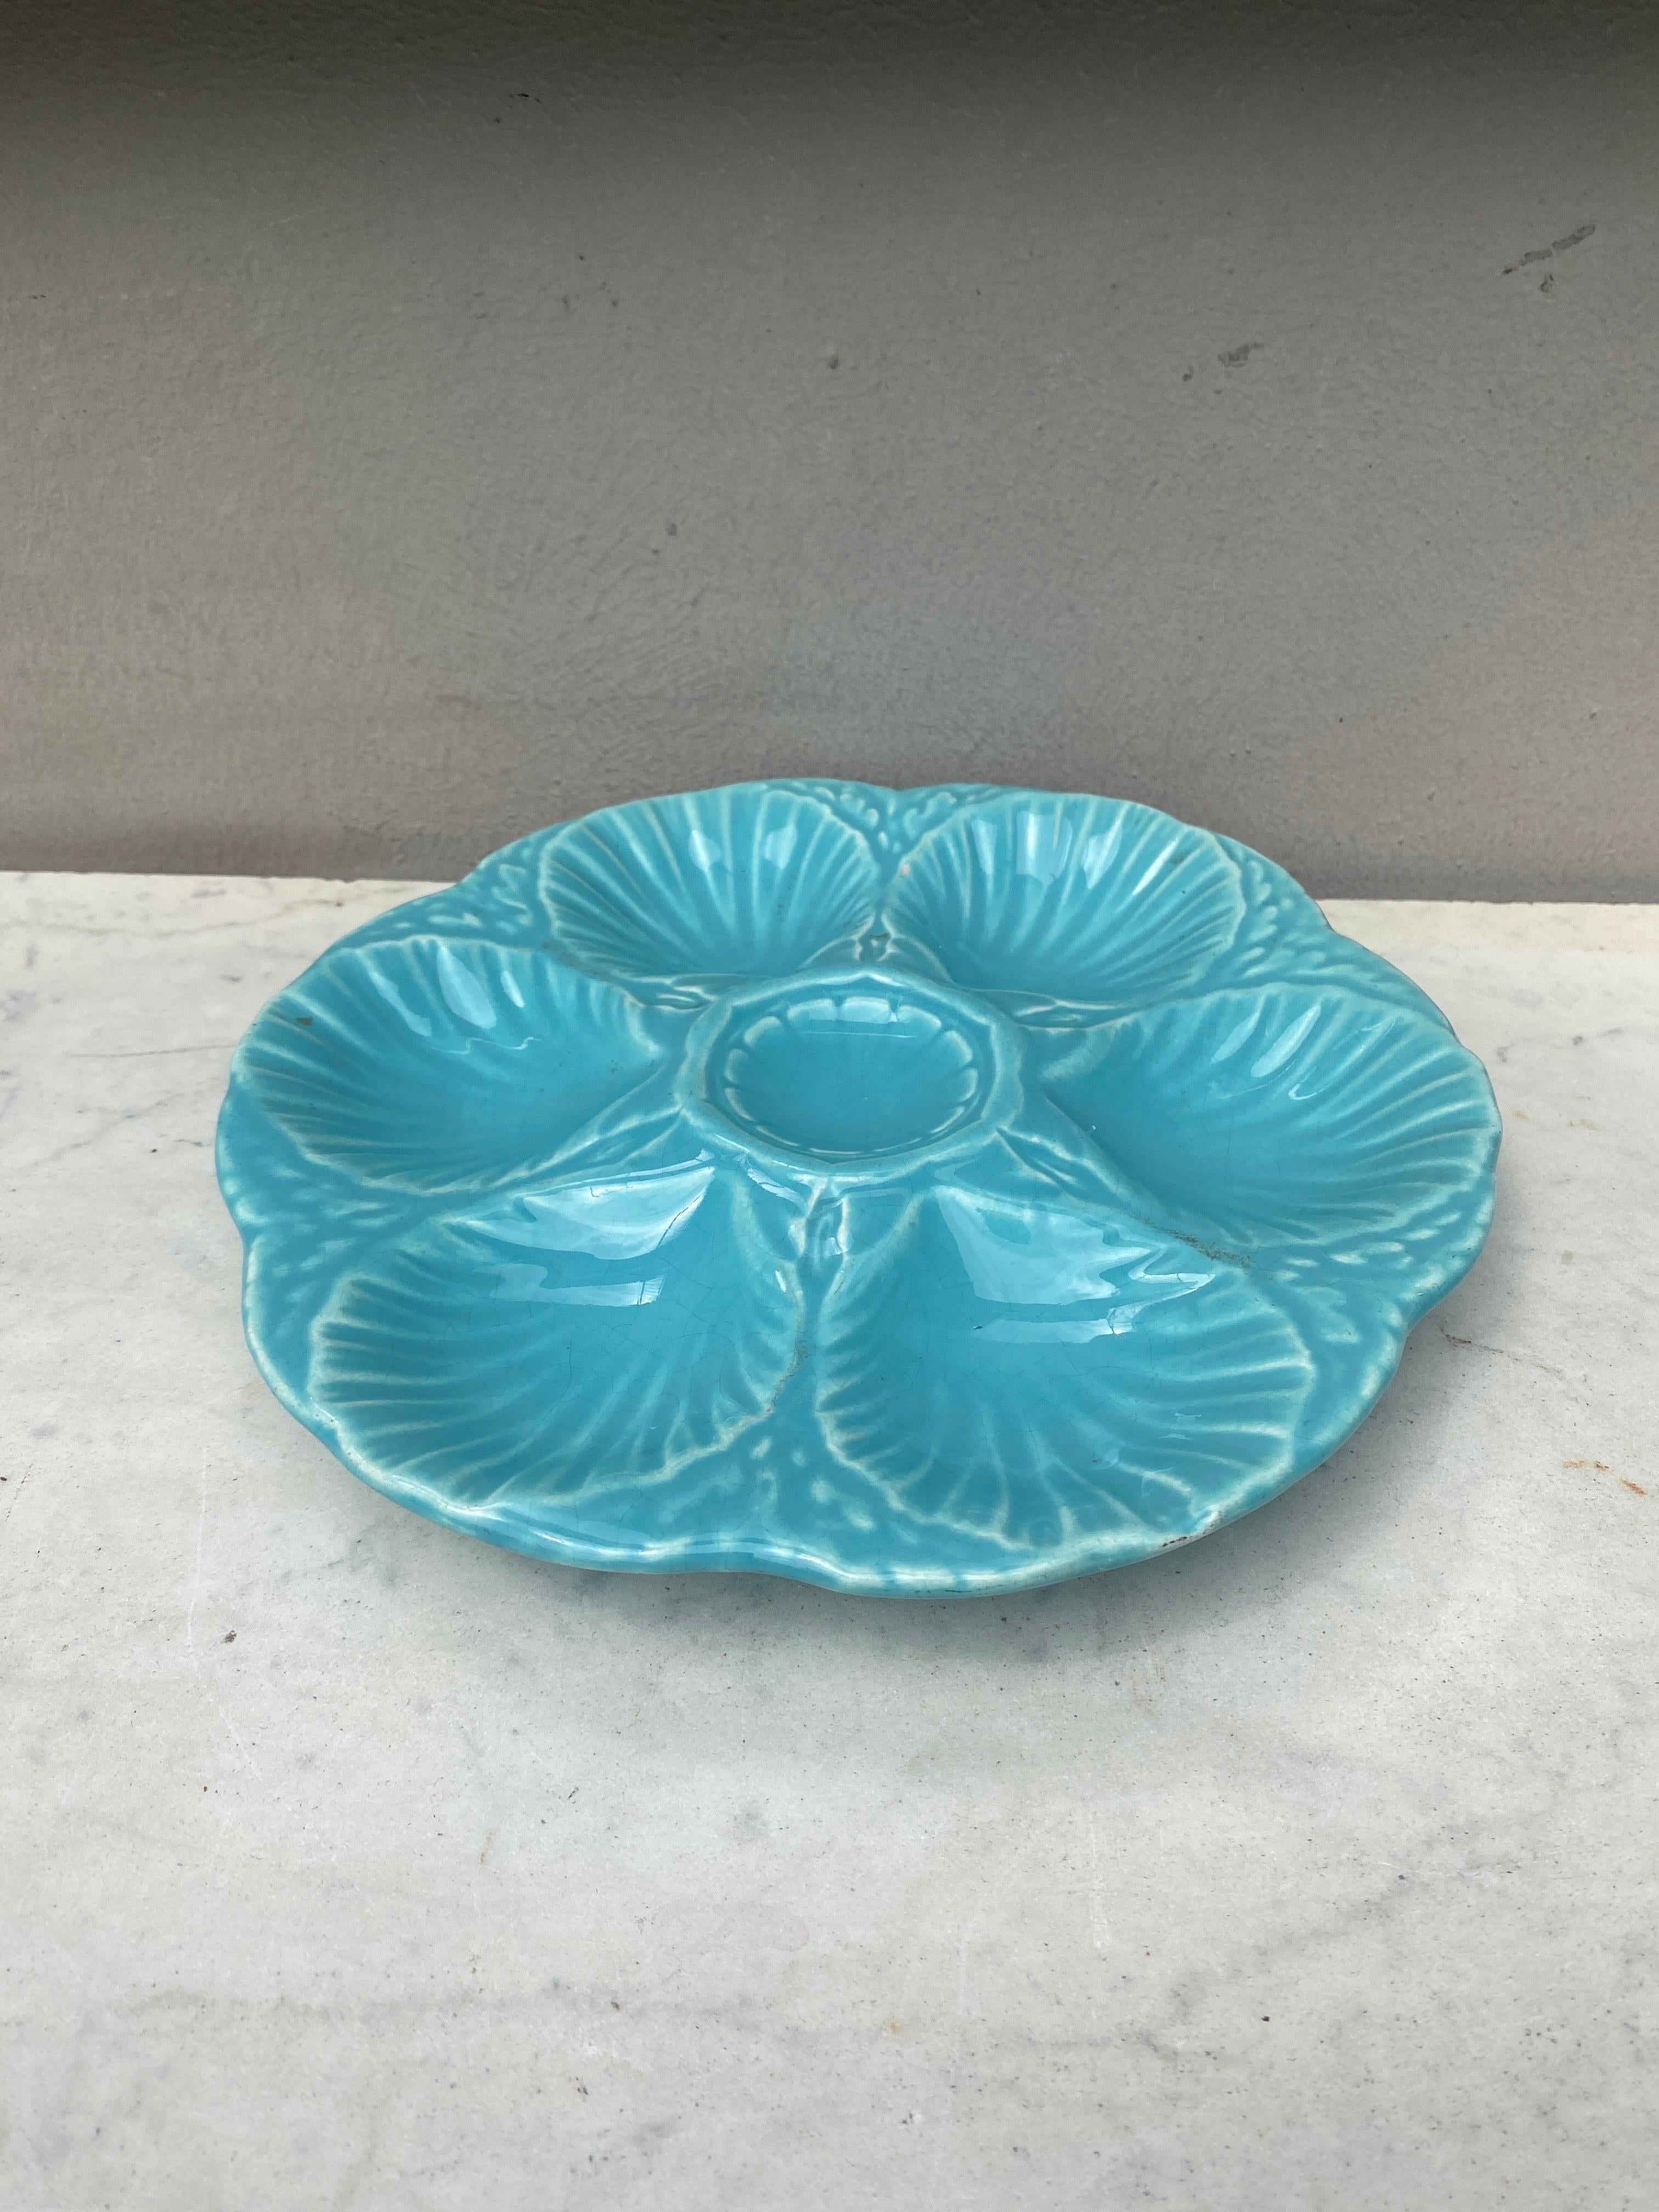 French Provincial French Majolica Oyster Aqua Turquoise Plate Sarreguemines, circa 1870 For Sale